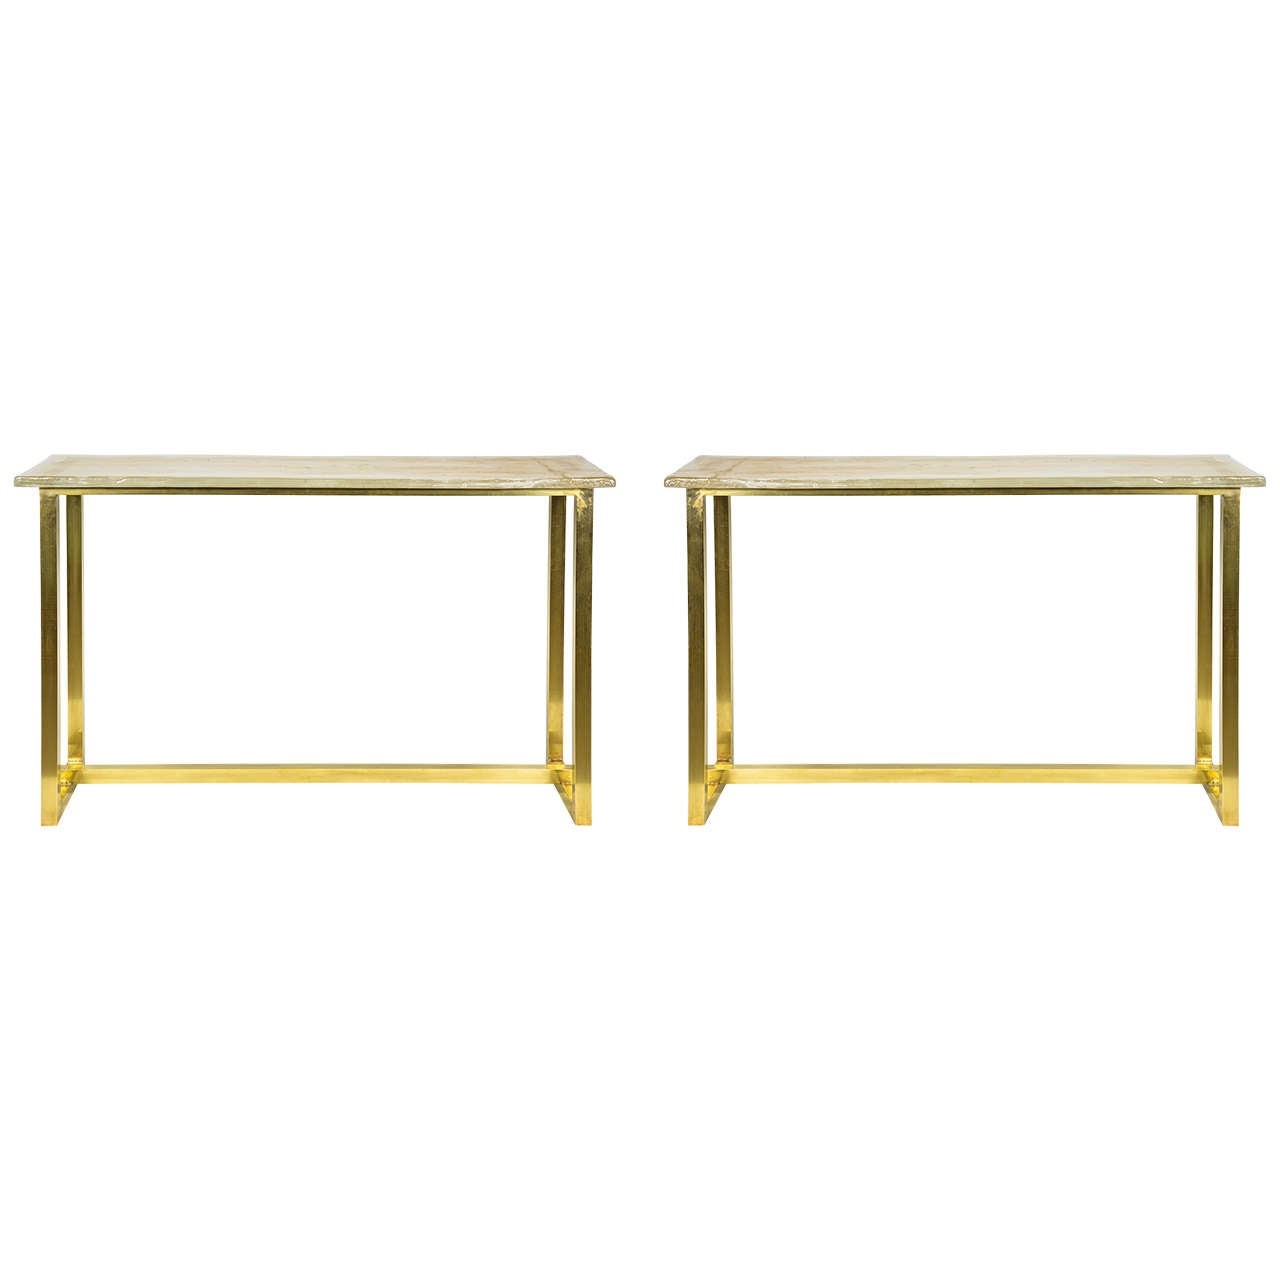 Pair of Console Tables with Top in Murano Glass